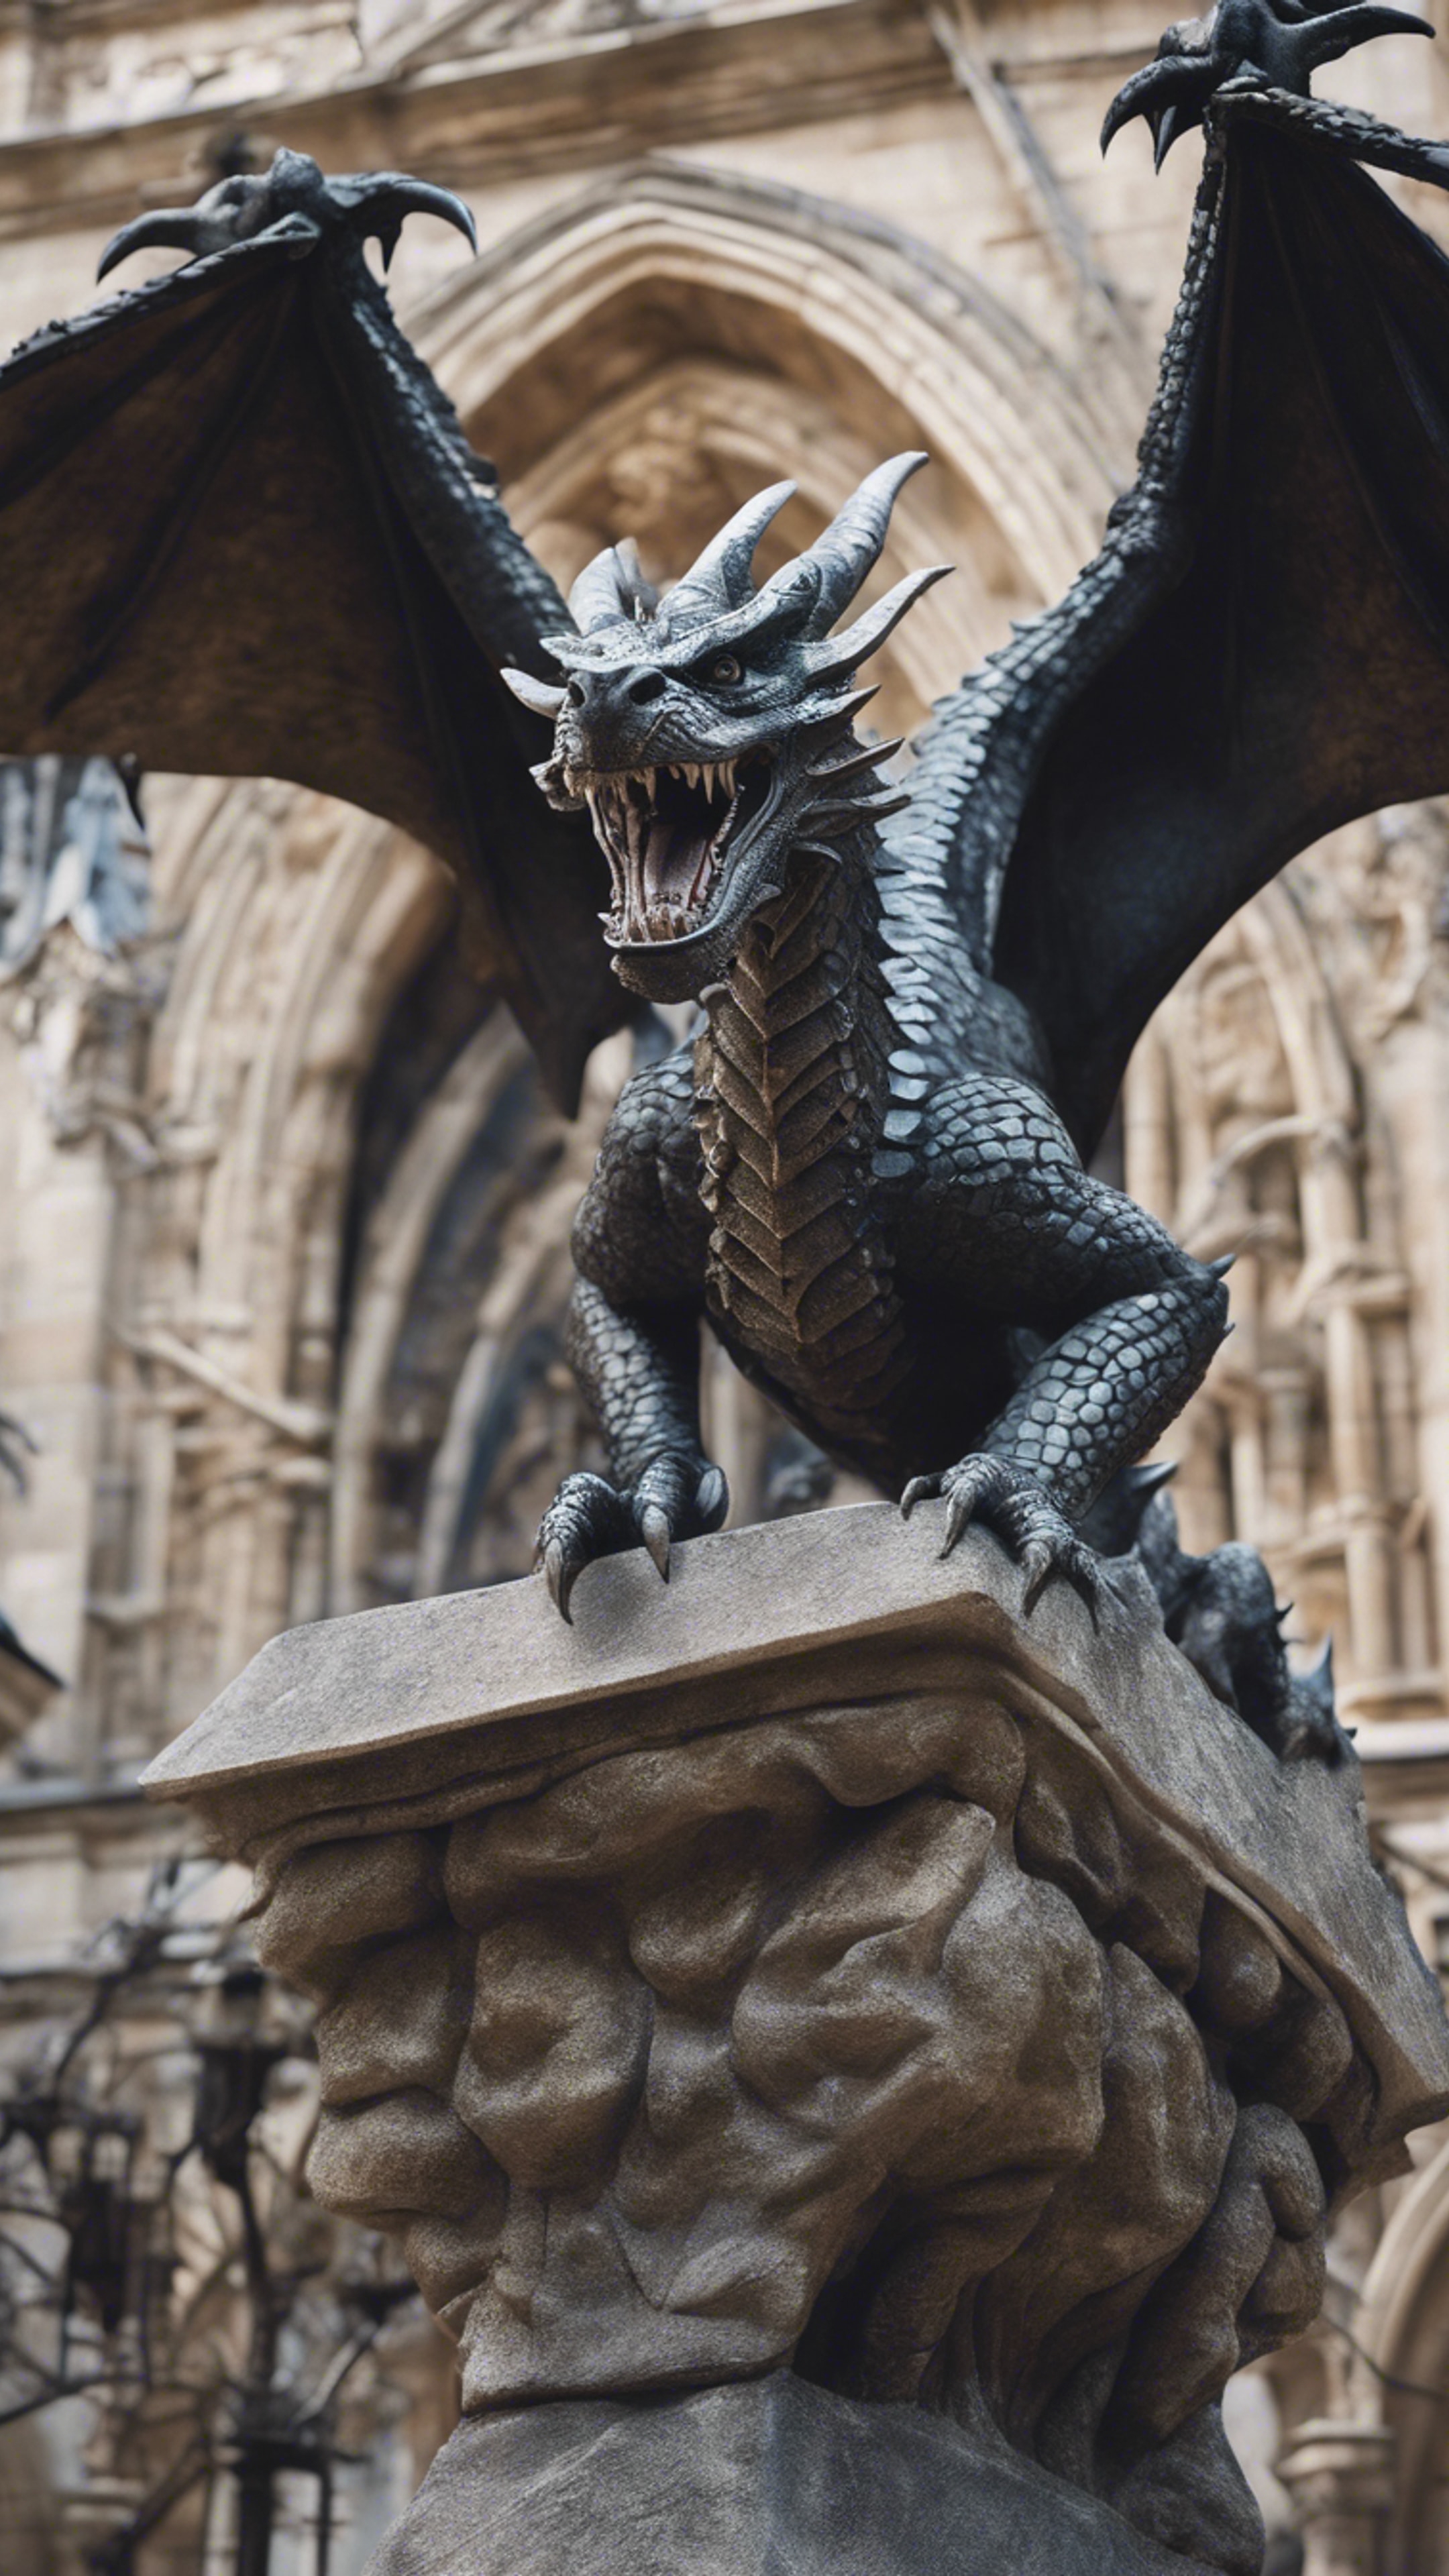 A stone dragon coming to life from the sculpture in a gothic cathedral's courtyard. ورق الجدران[86d9df9db55943e58db6]